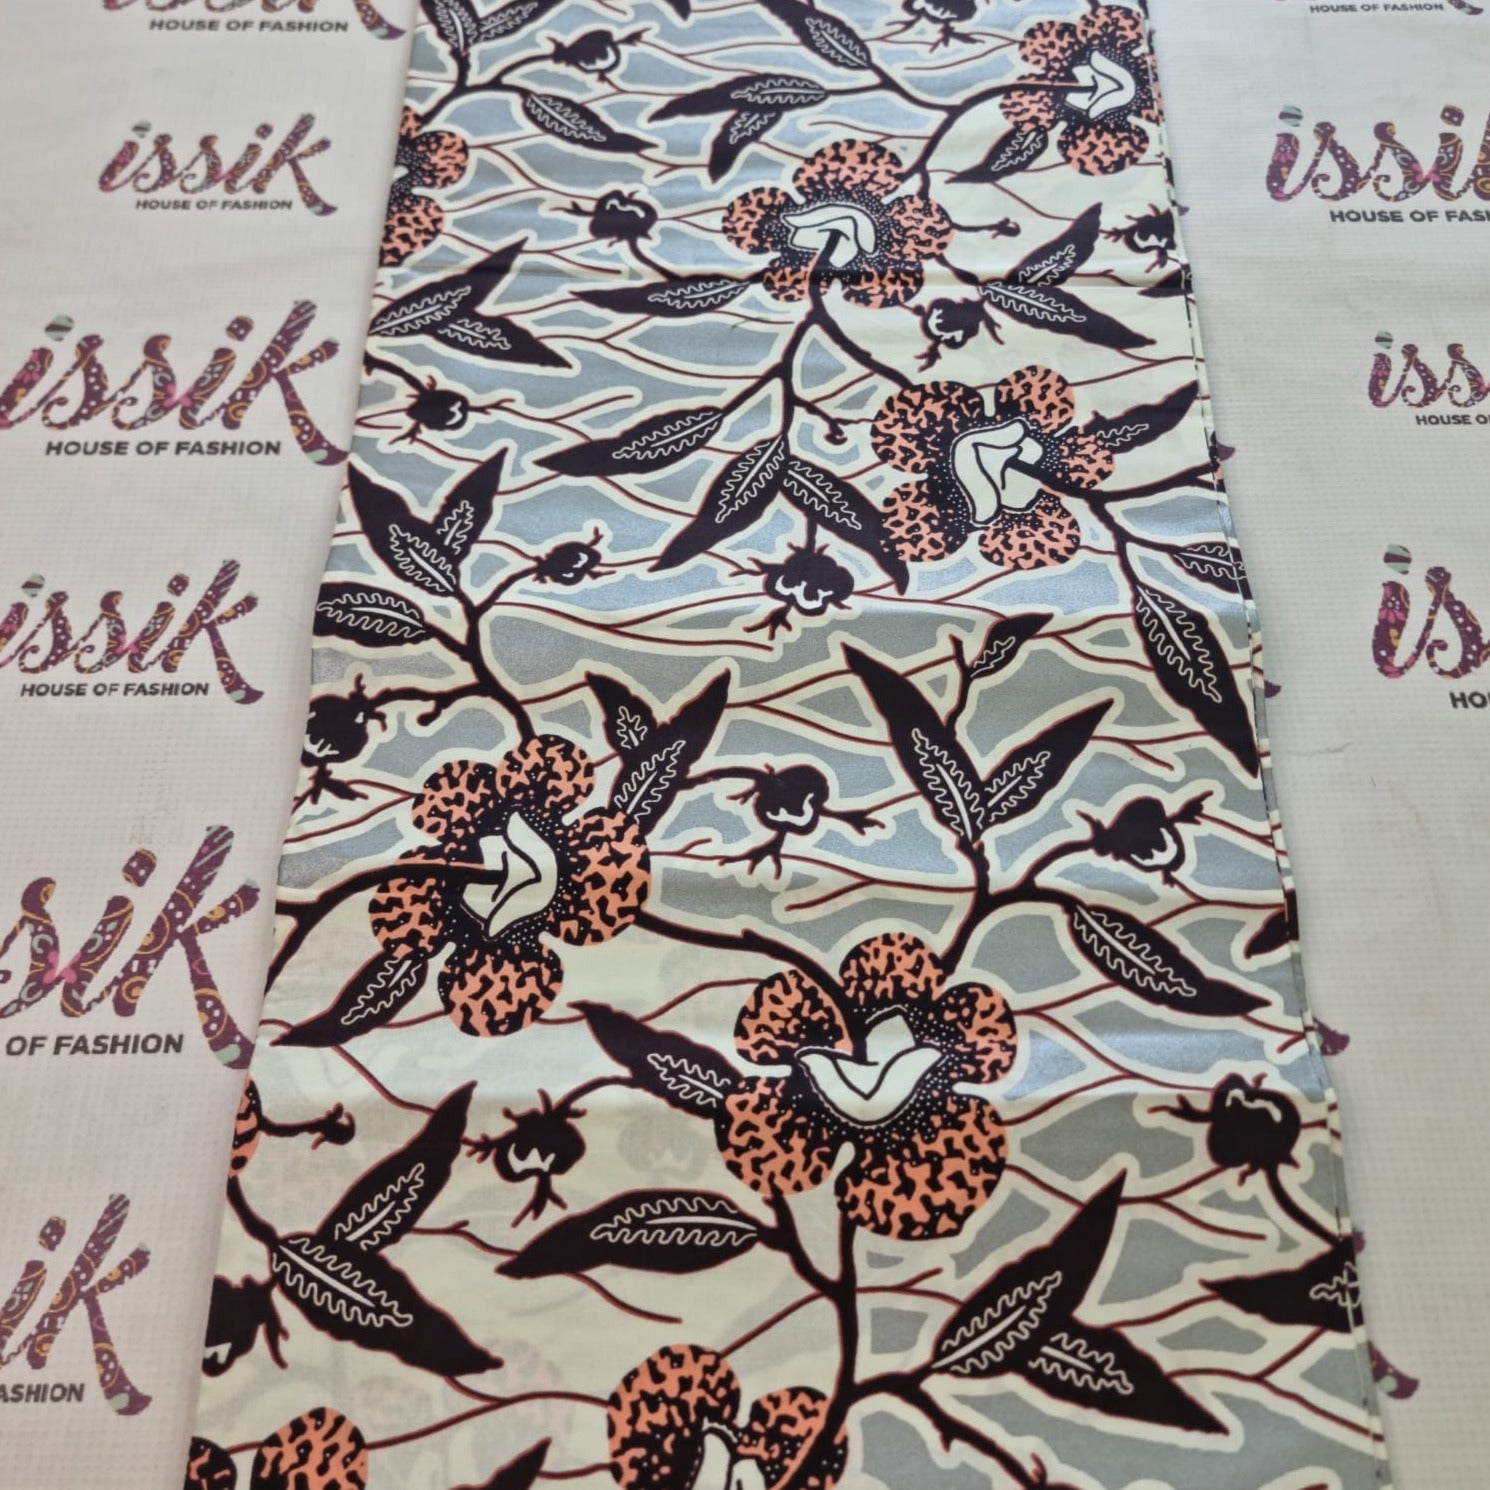 Silver & Brown Embellished African Print Fabric - House of Prints